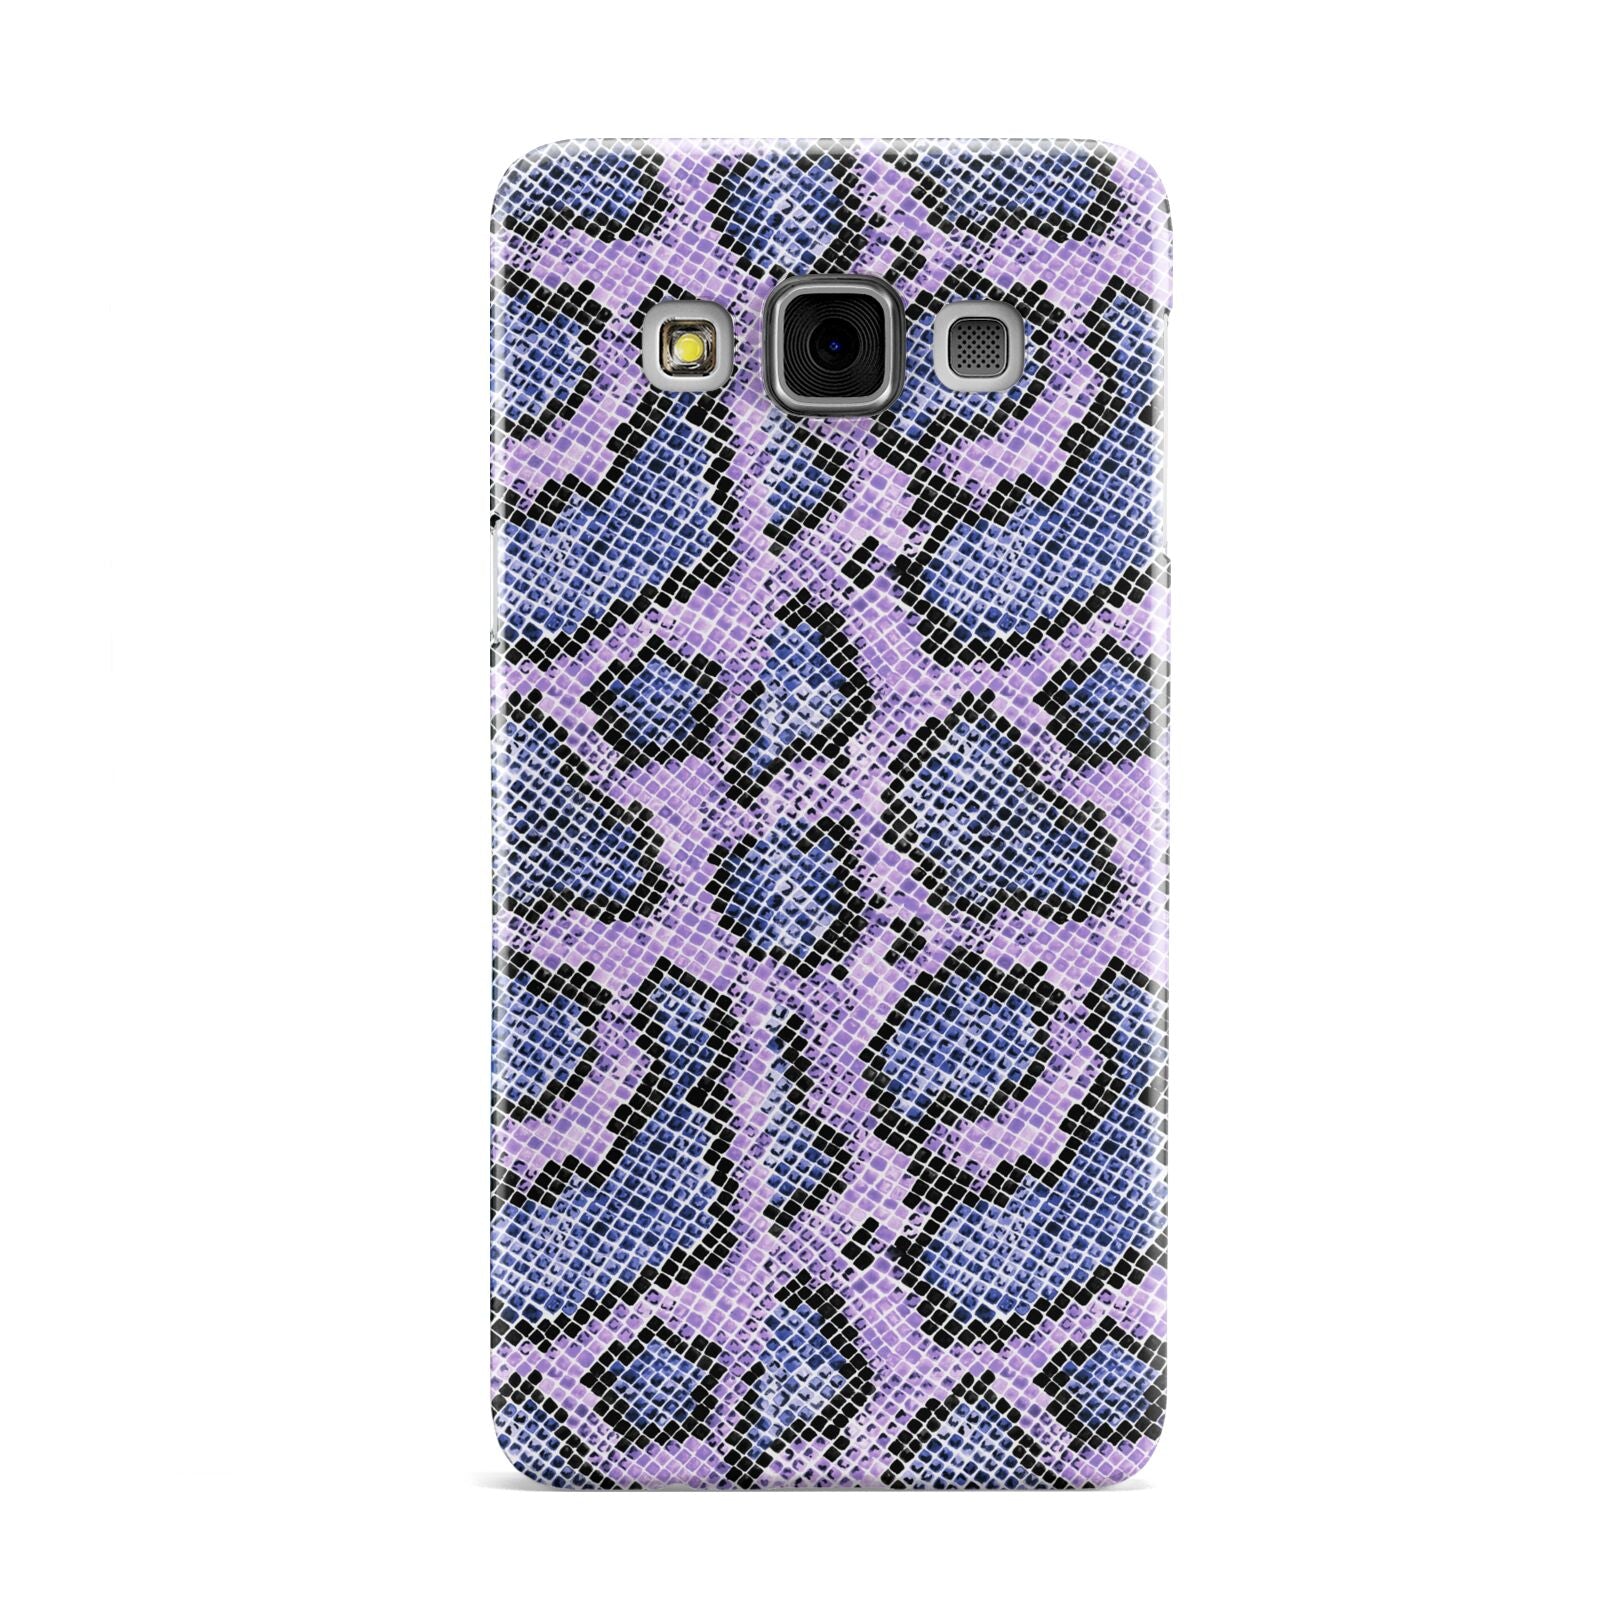 Purple And Blue Snakeskin Samsung Galaxy A3 Case